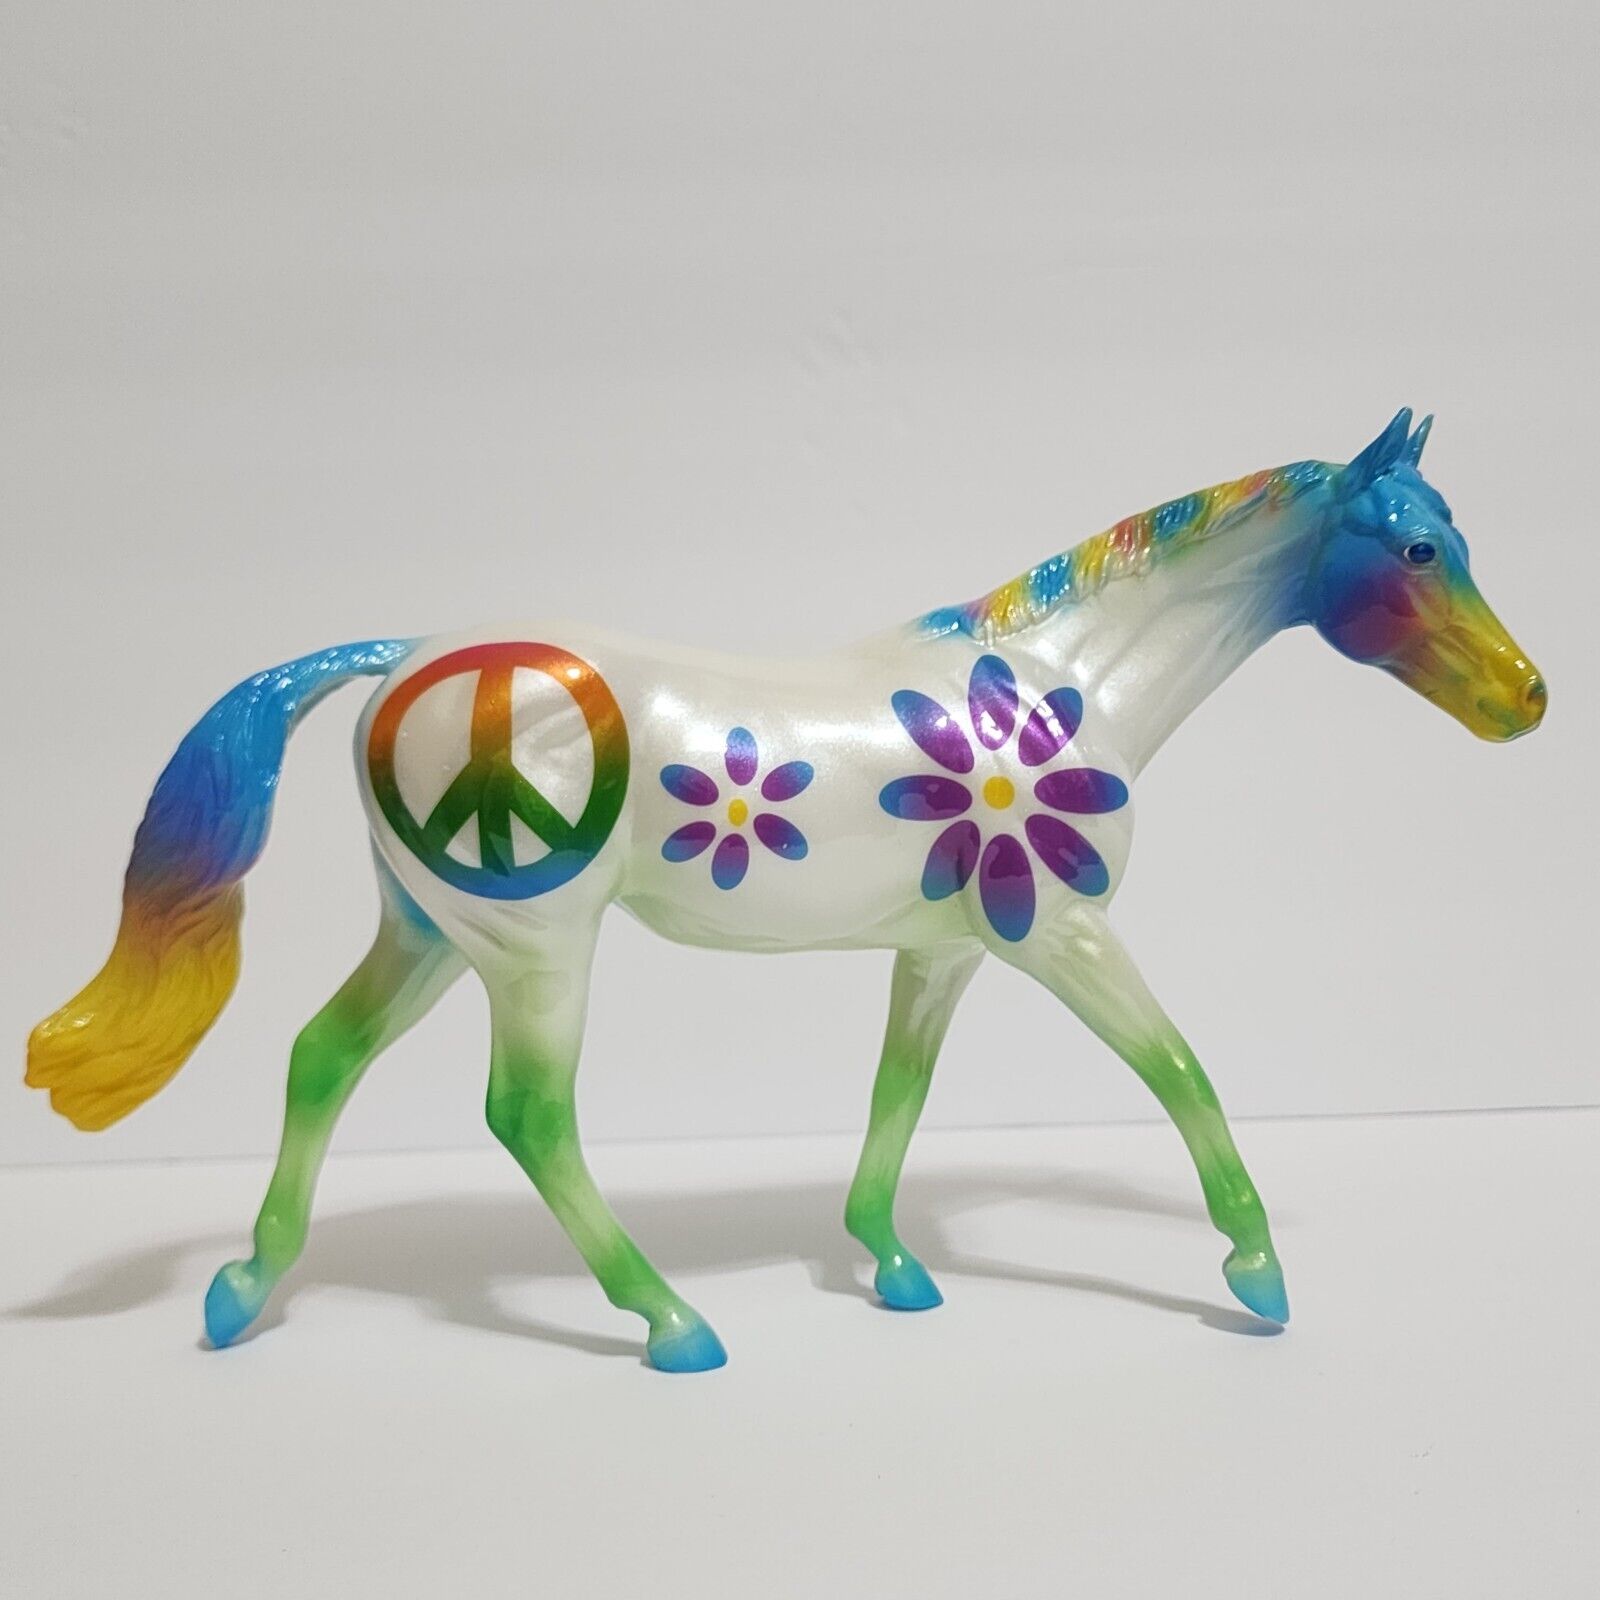 BREYER HORSE  “Peace, Love & Horses” Colorful Hand Painted Limited Edition 